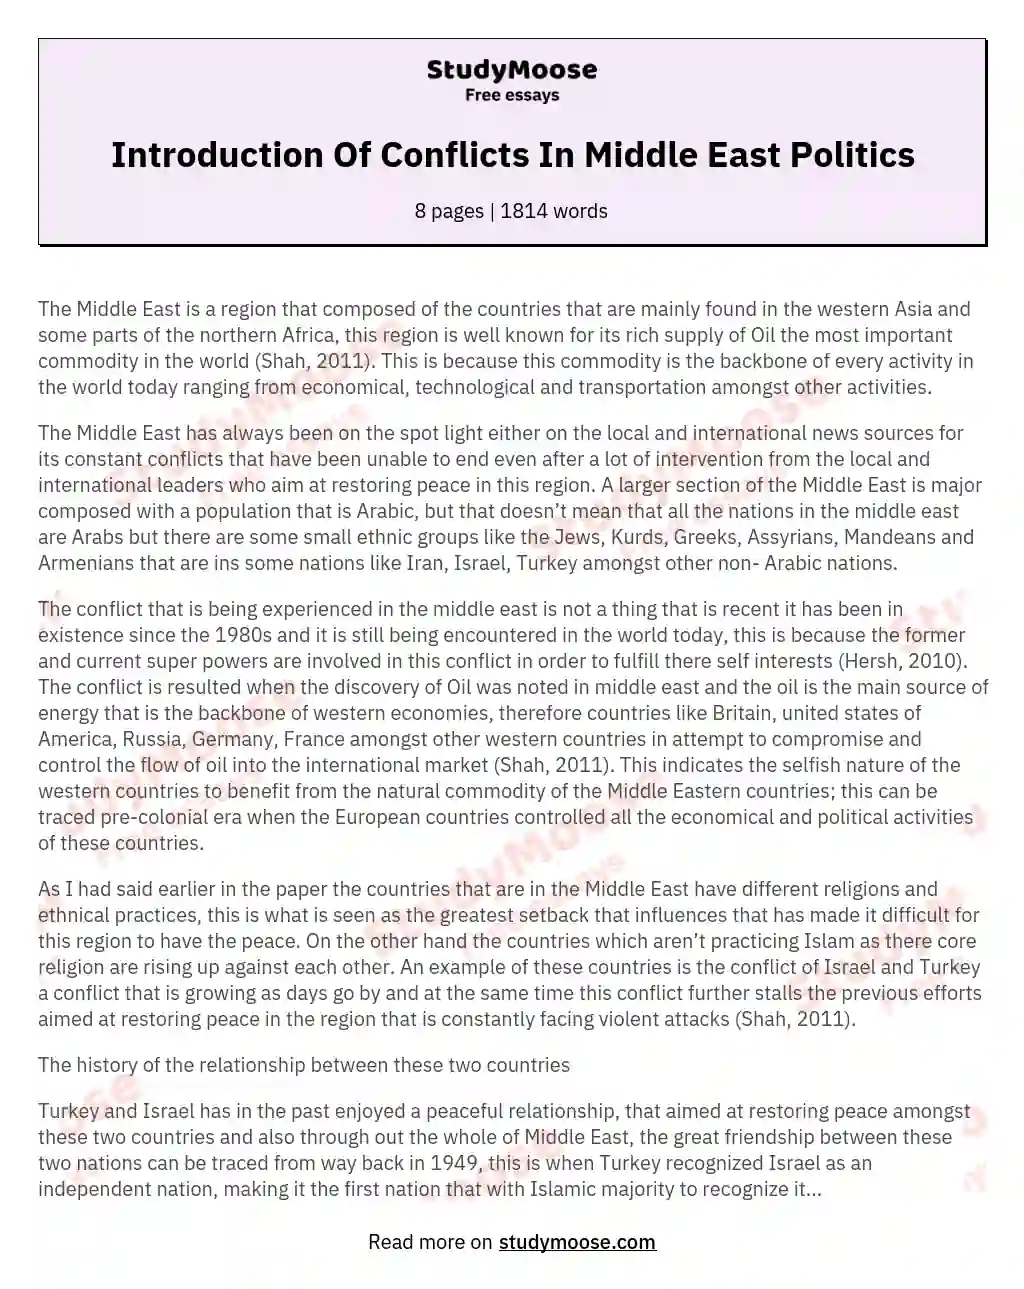 Introduction Of Conflicts In Middle East Politics essay